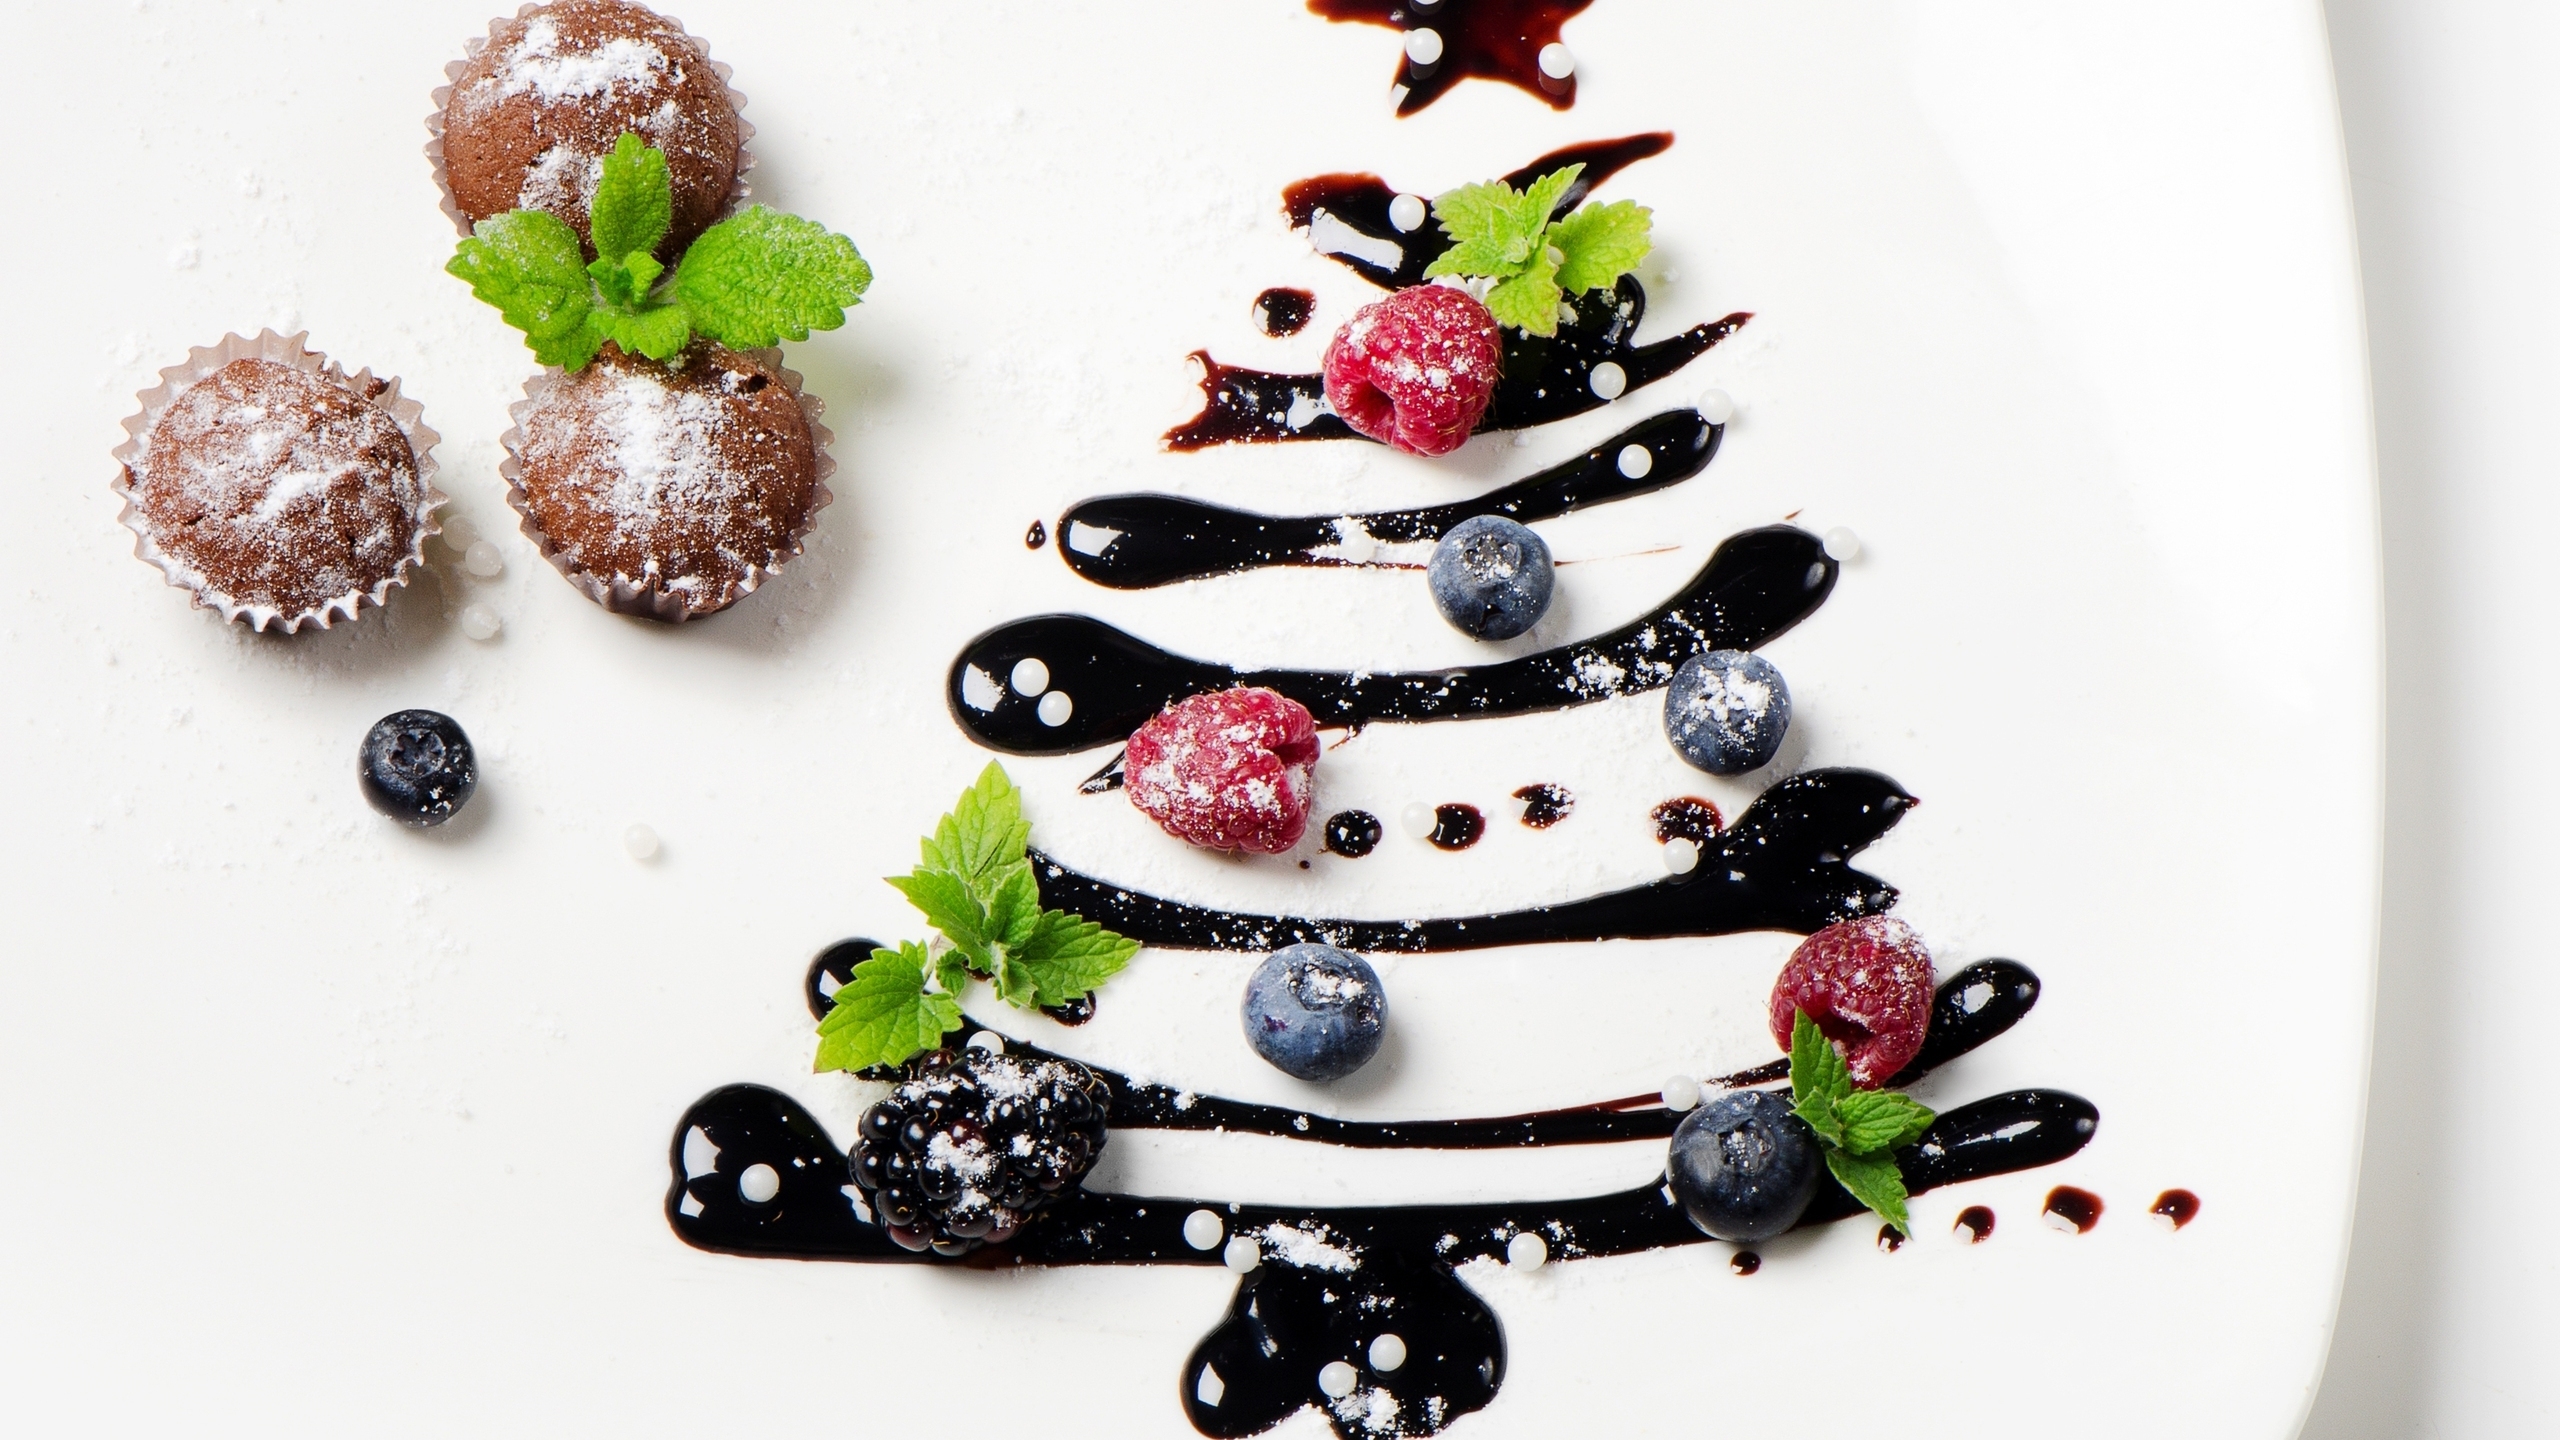 Christmas Sweets Tree for 2560x1440 HDTV resolution